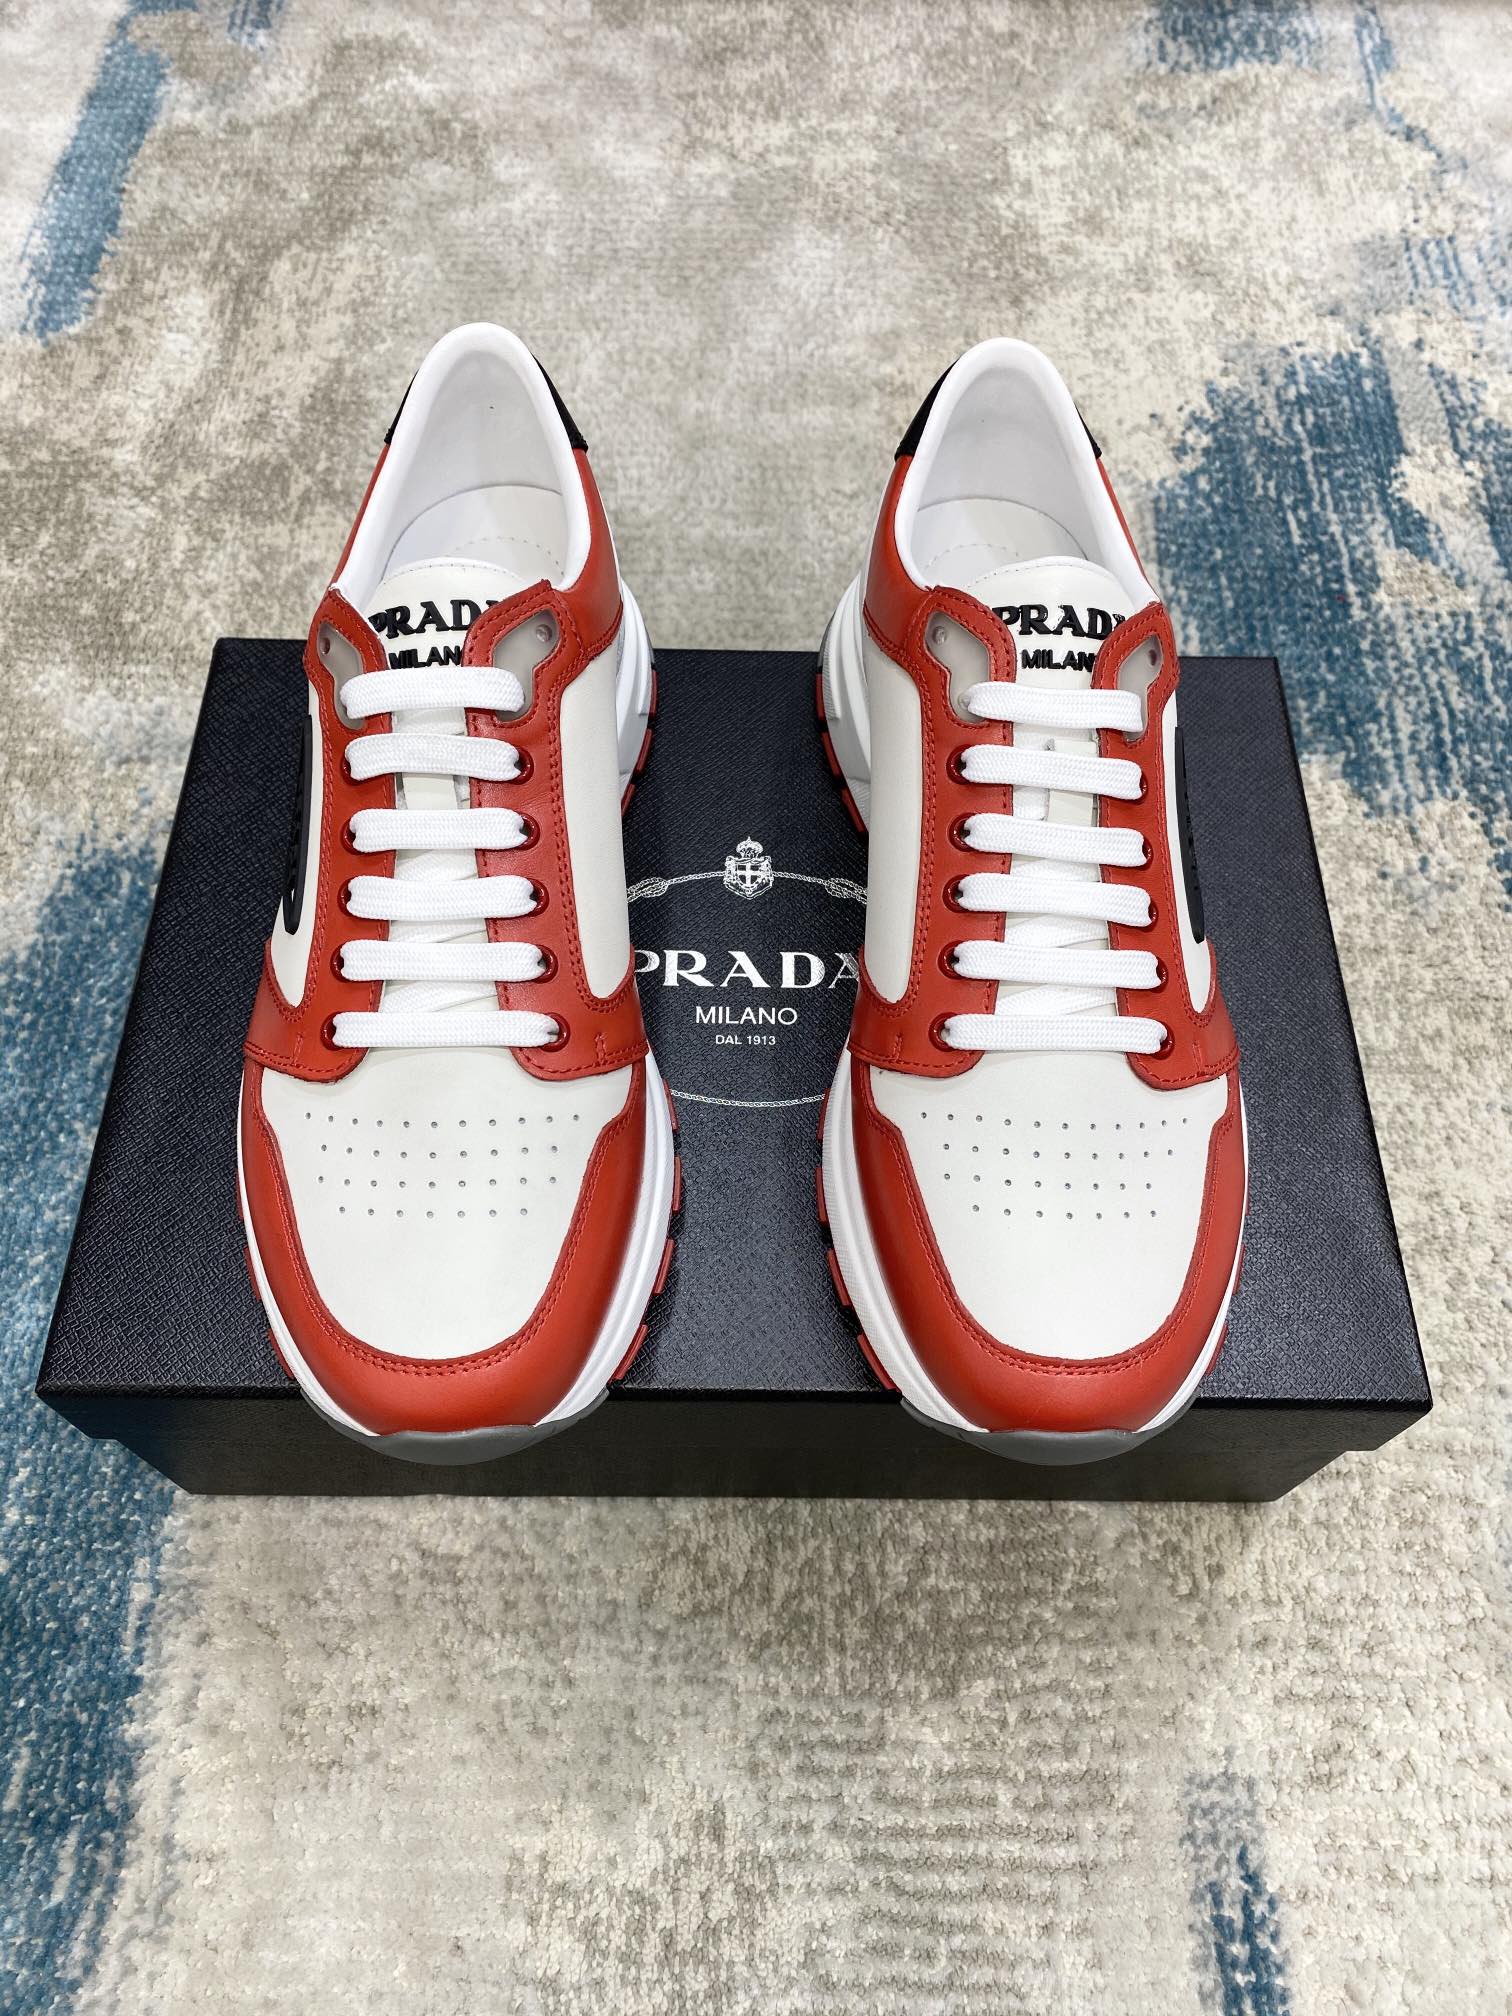 Prada Leisure Sneaker in White with Red